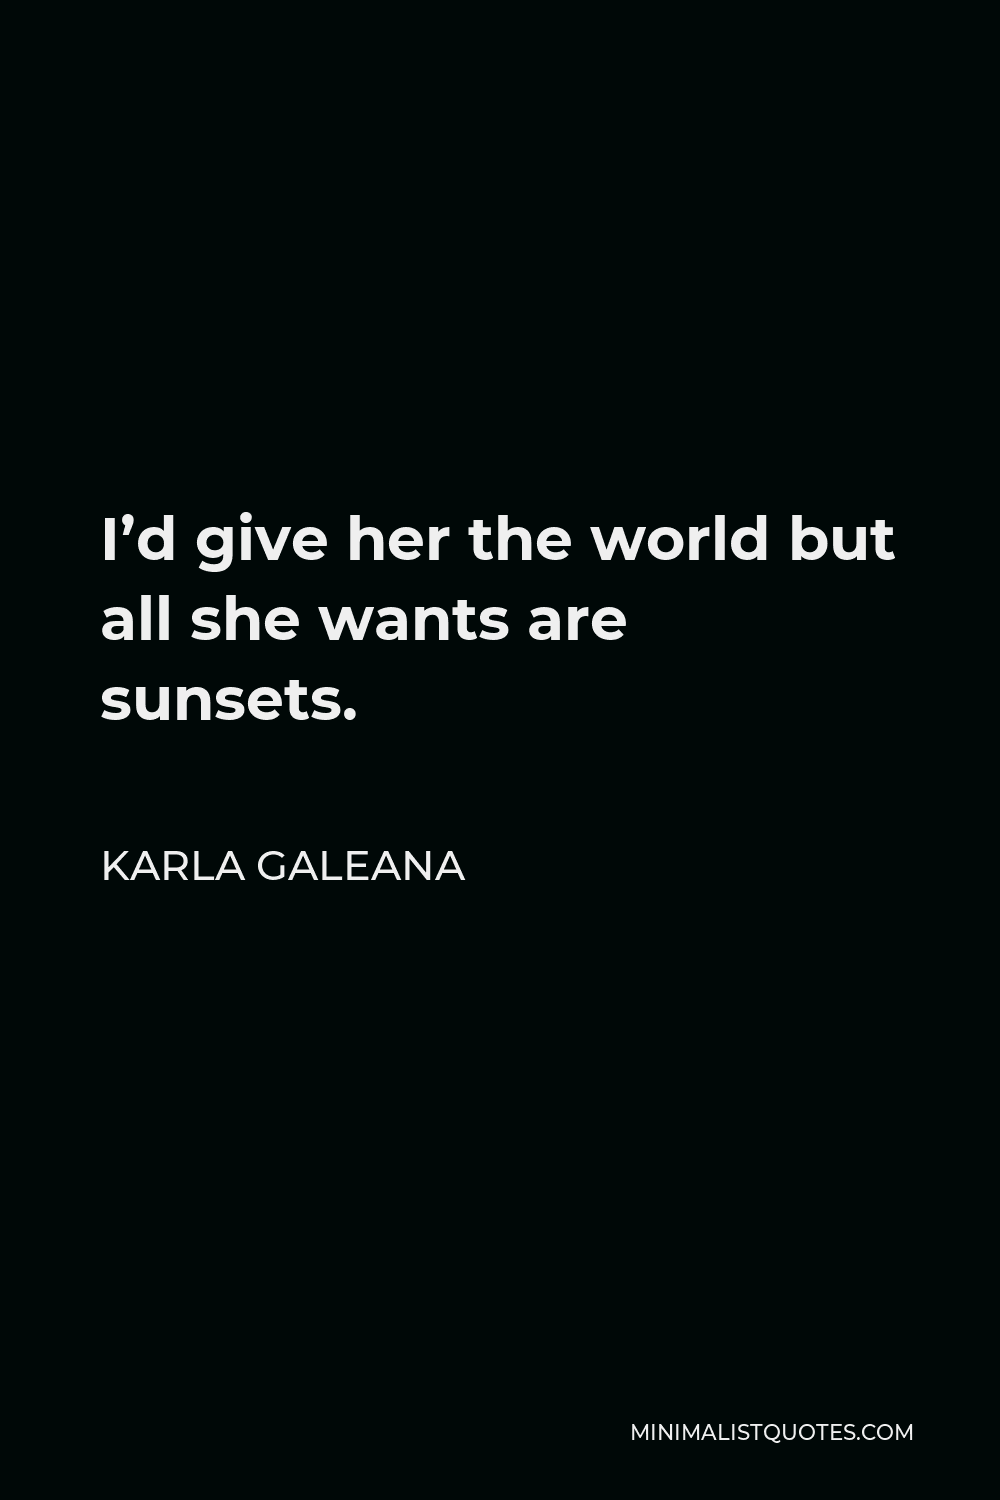 Karla Galeana Quote - I’d give her the world but all she wants are sunsets.